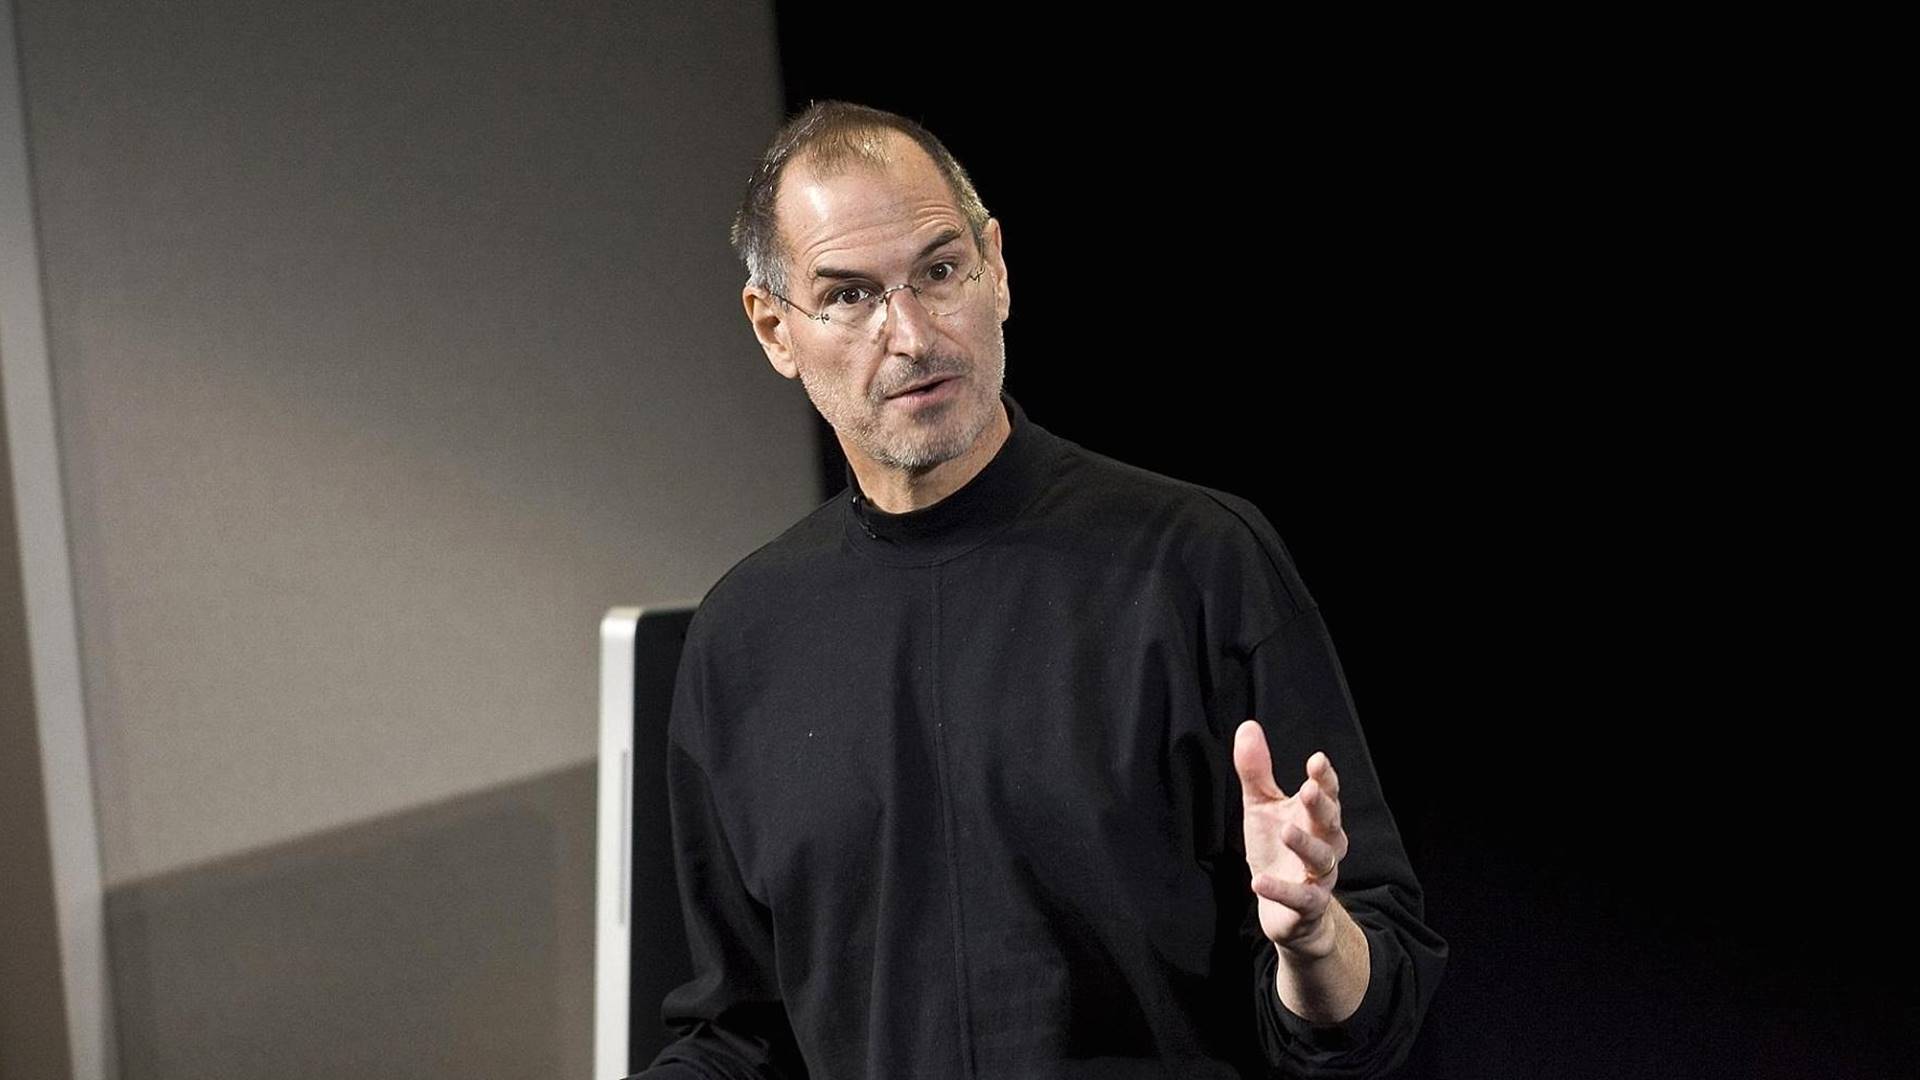 Bill Gates, Elon Musk, and 4 other business leaders on the best lessons they learned from Steve Jobs